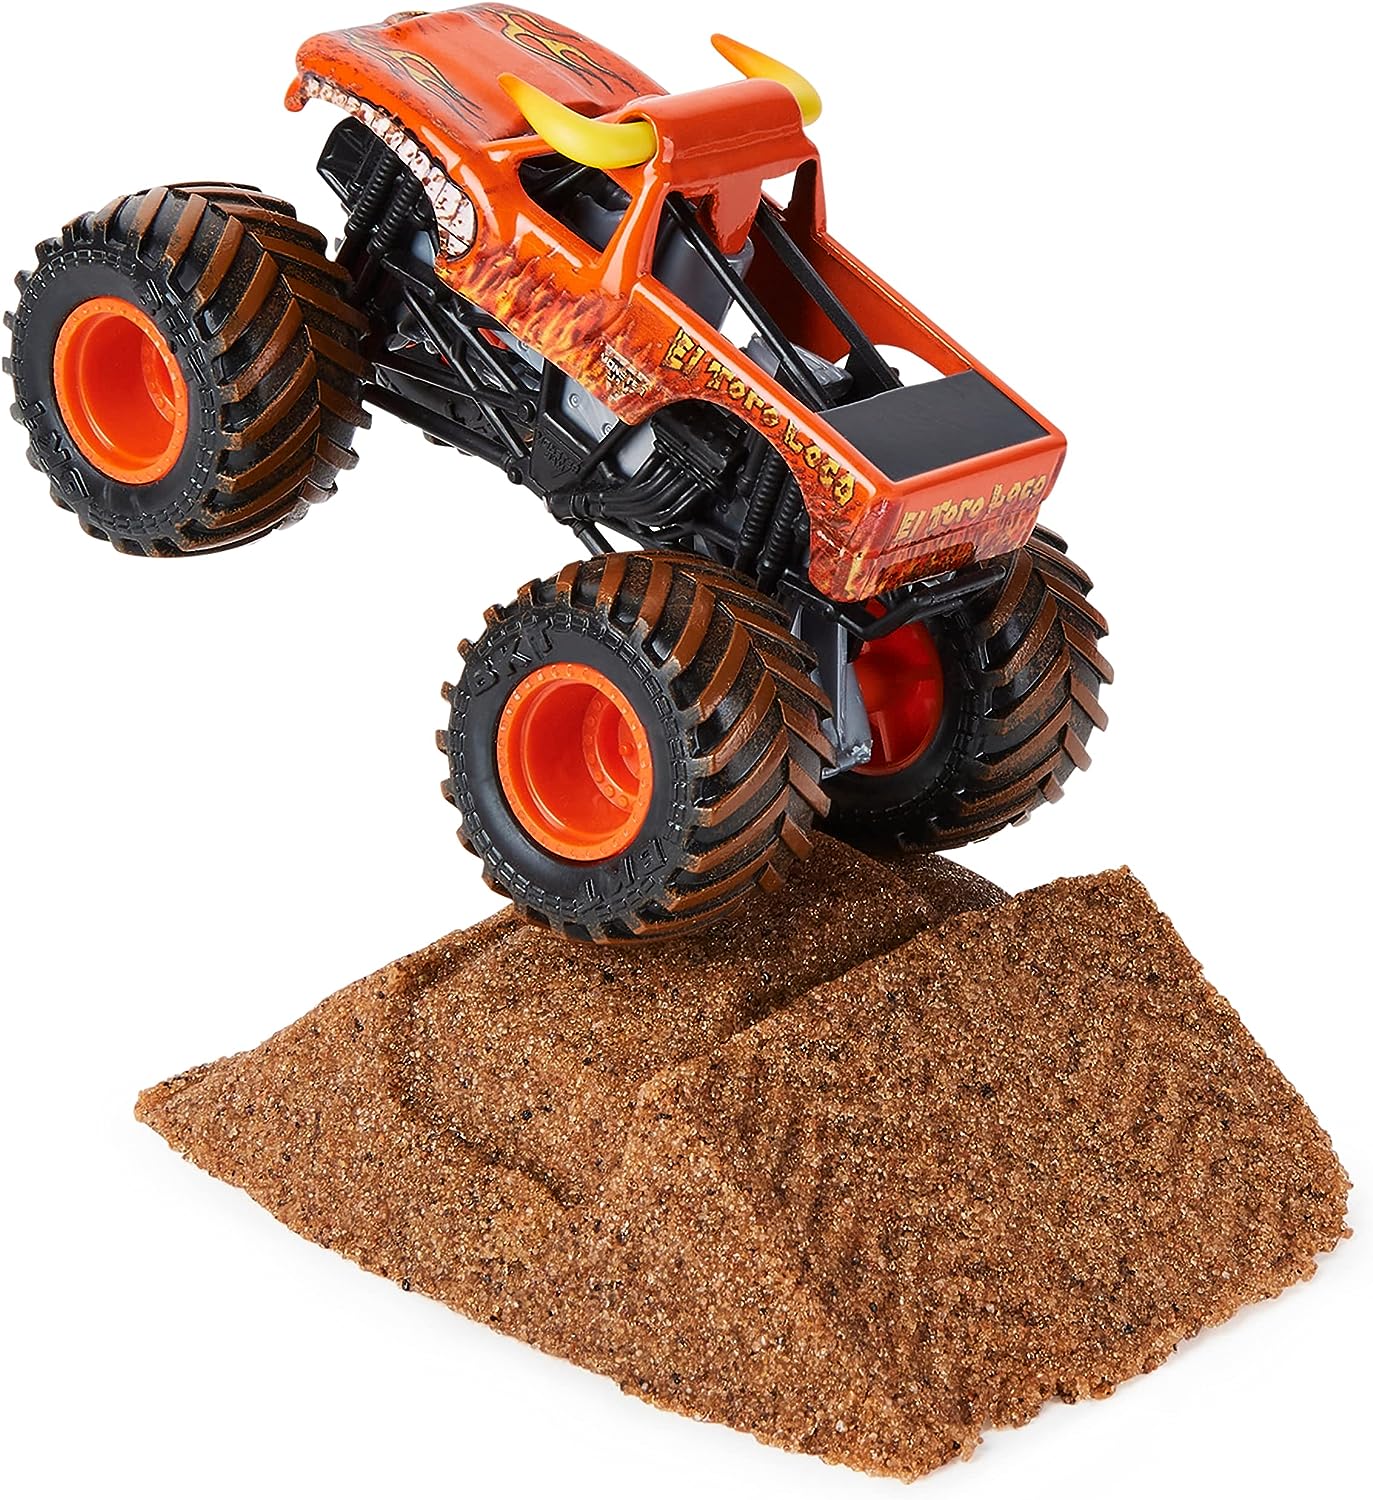 Monster Jam, El Toro Loco Monster Dirt 8oz Starter Set and Official 1:64 Scale Die-Cast Monster Truck, Kids Toys for Boys Ages 3 and up